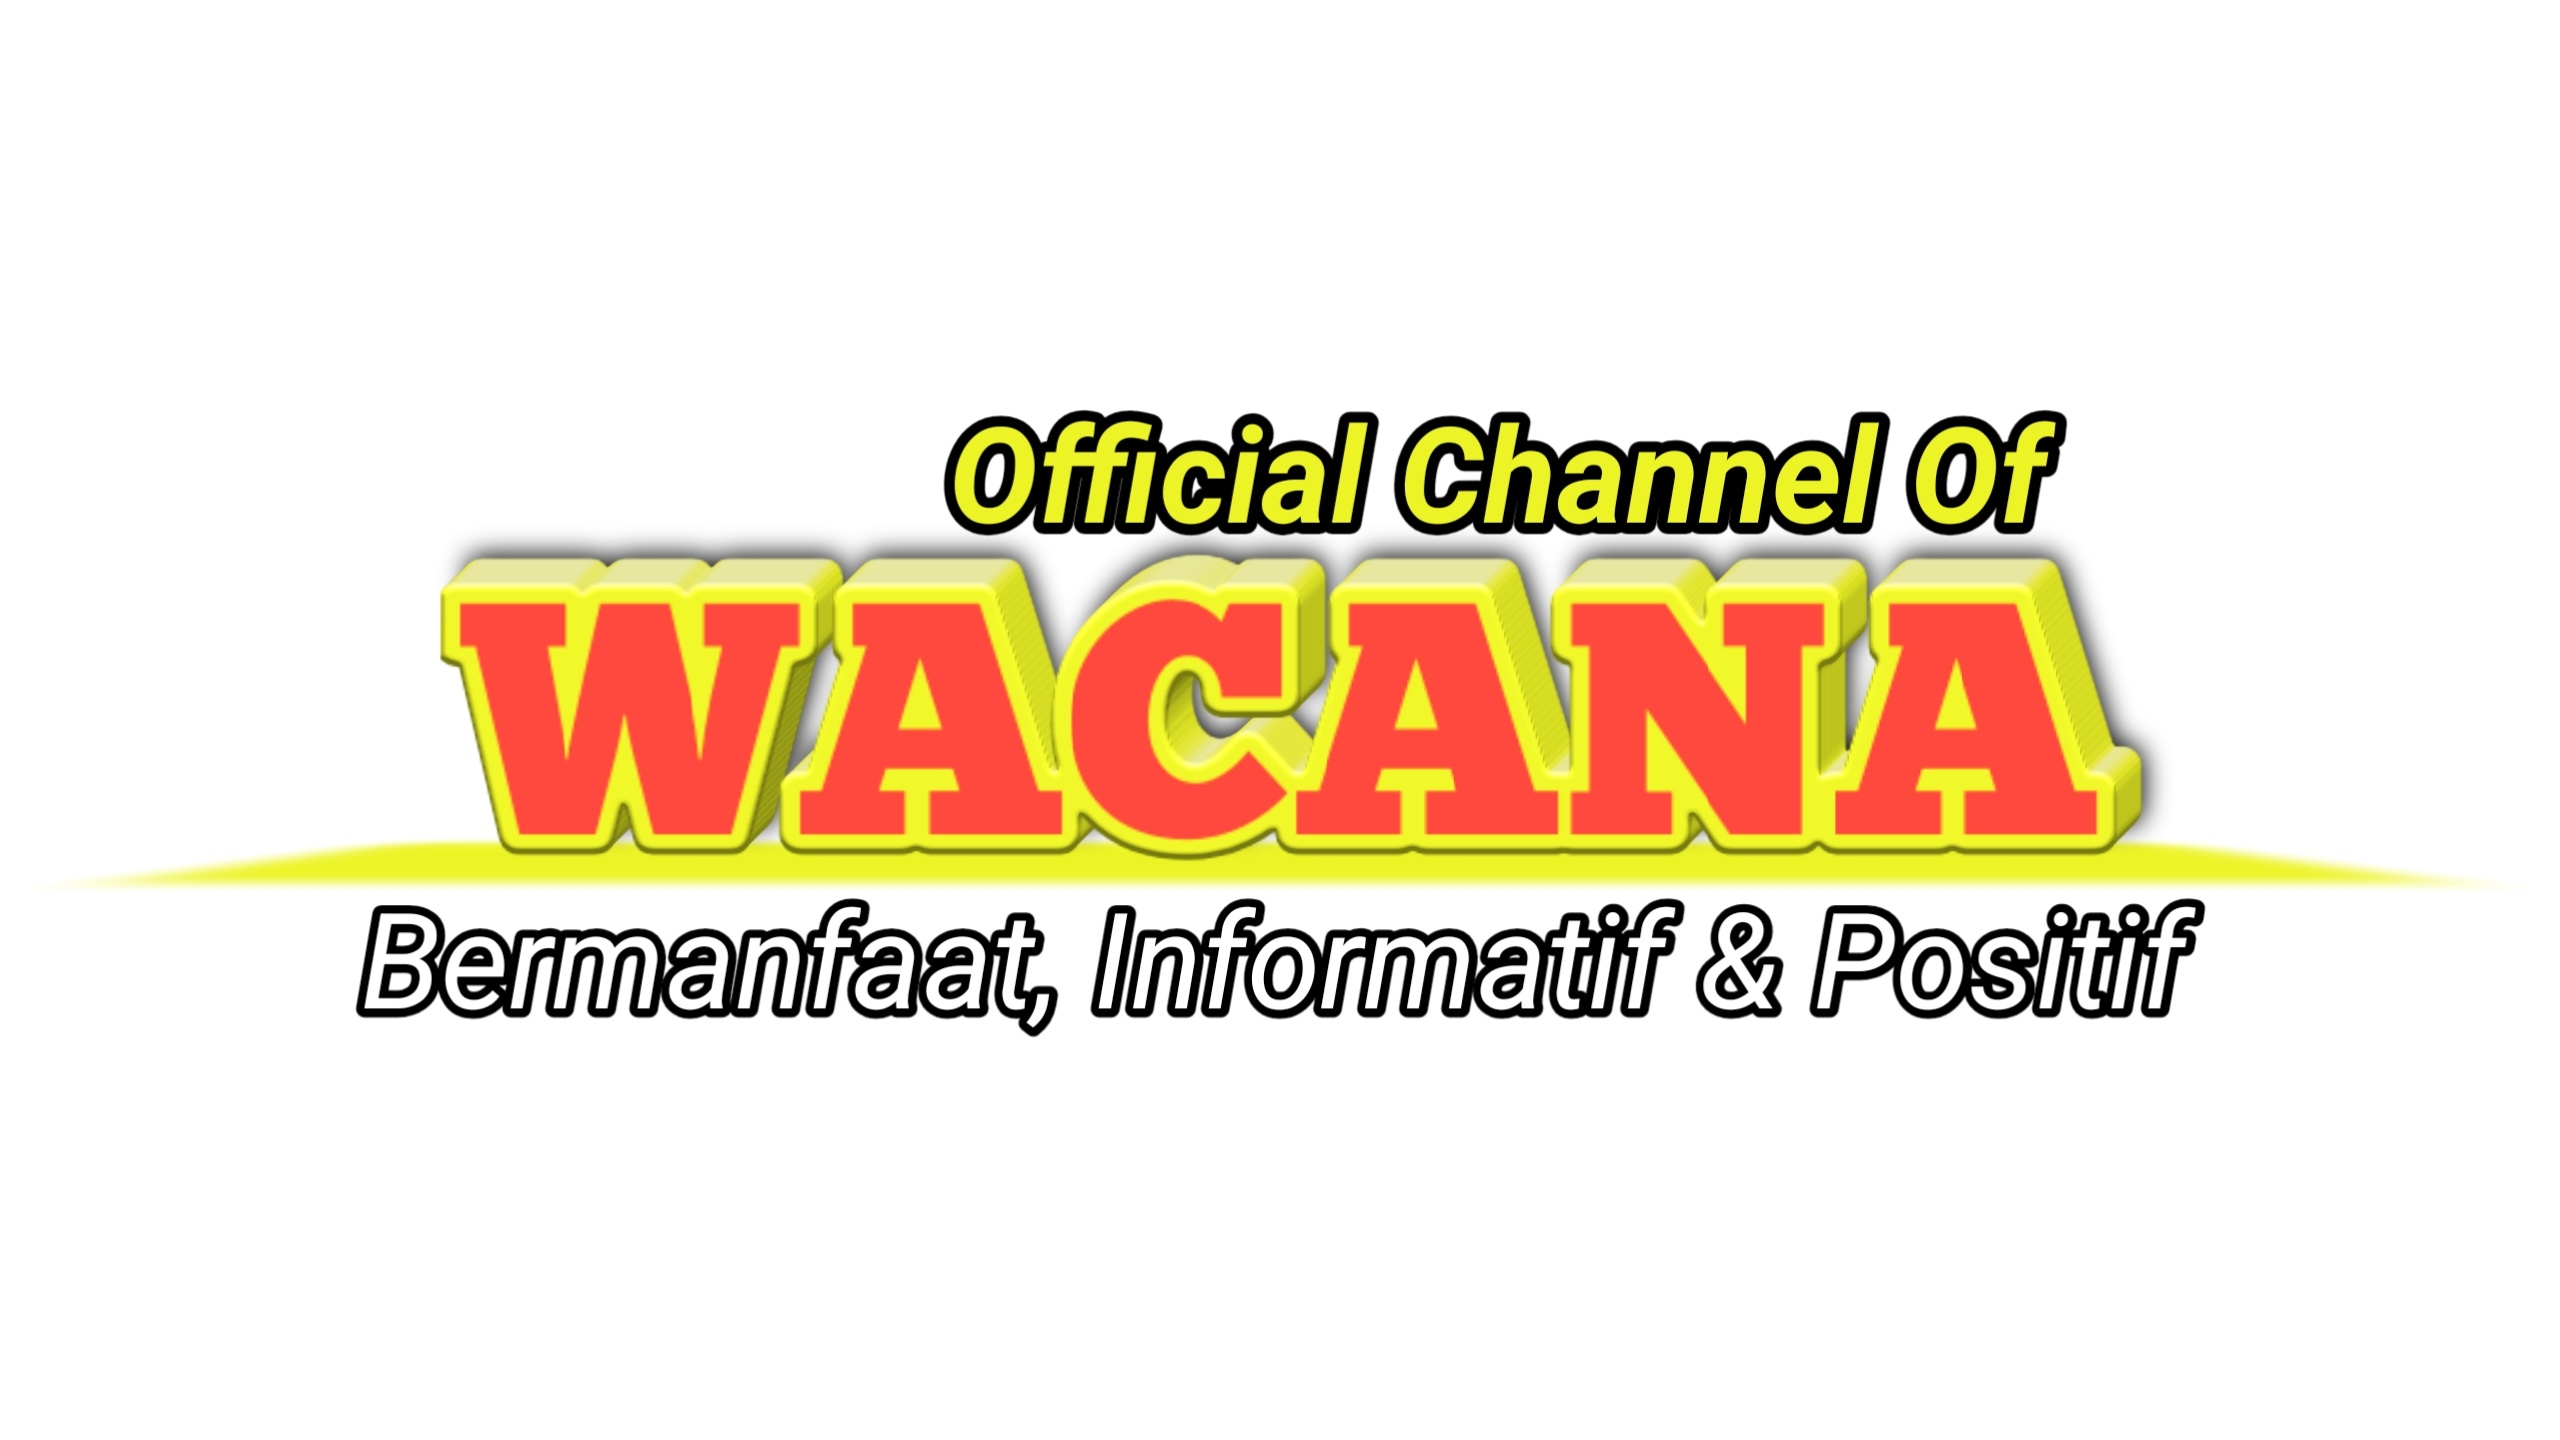 Video WacanaNews channel